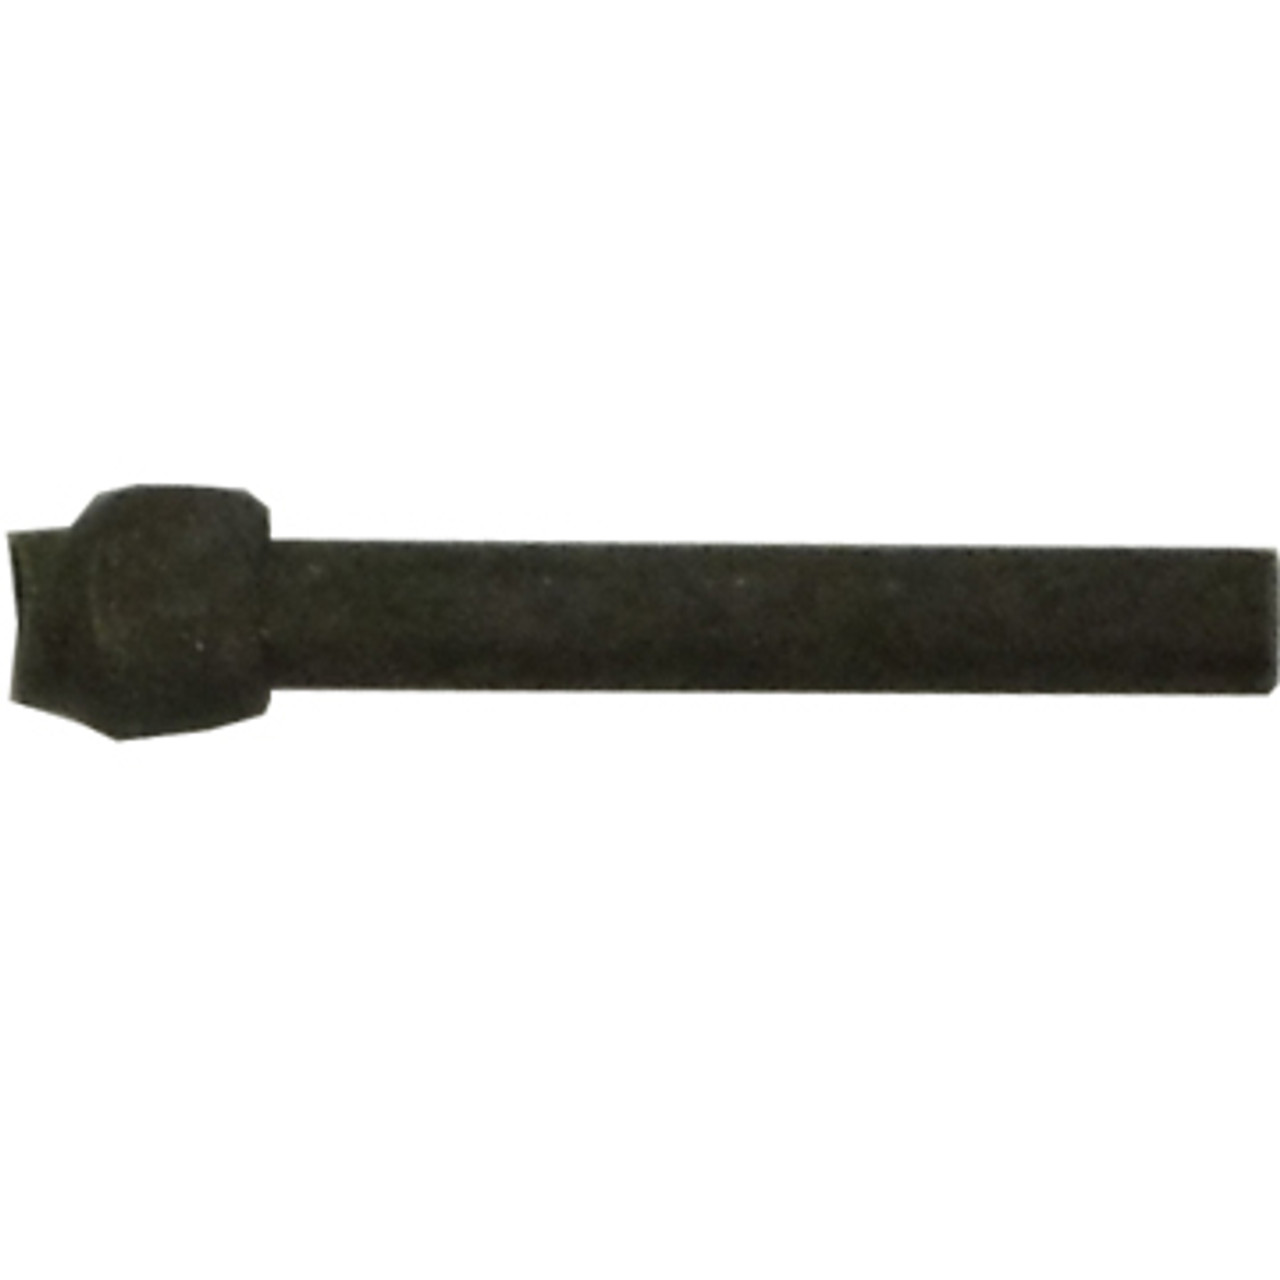 260KP Cotter Pin 2.60" Chain